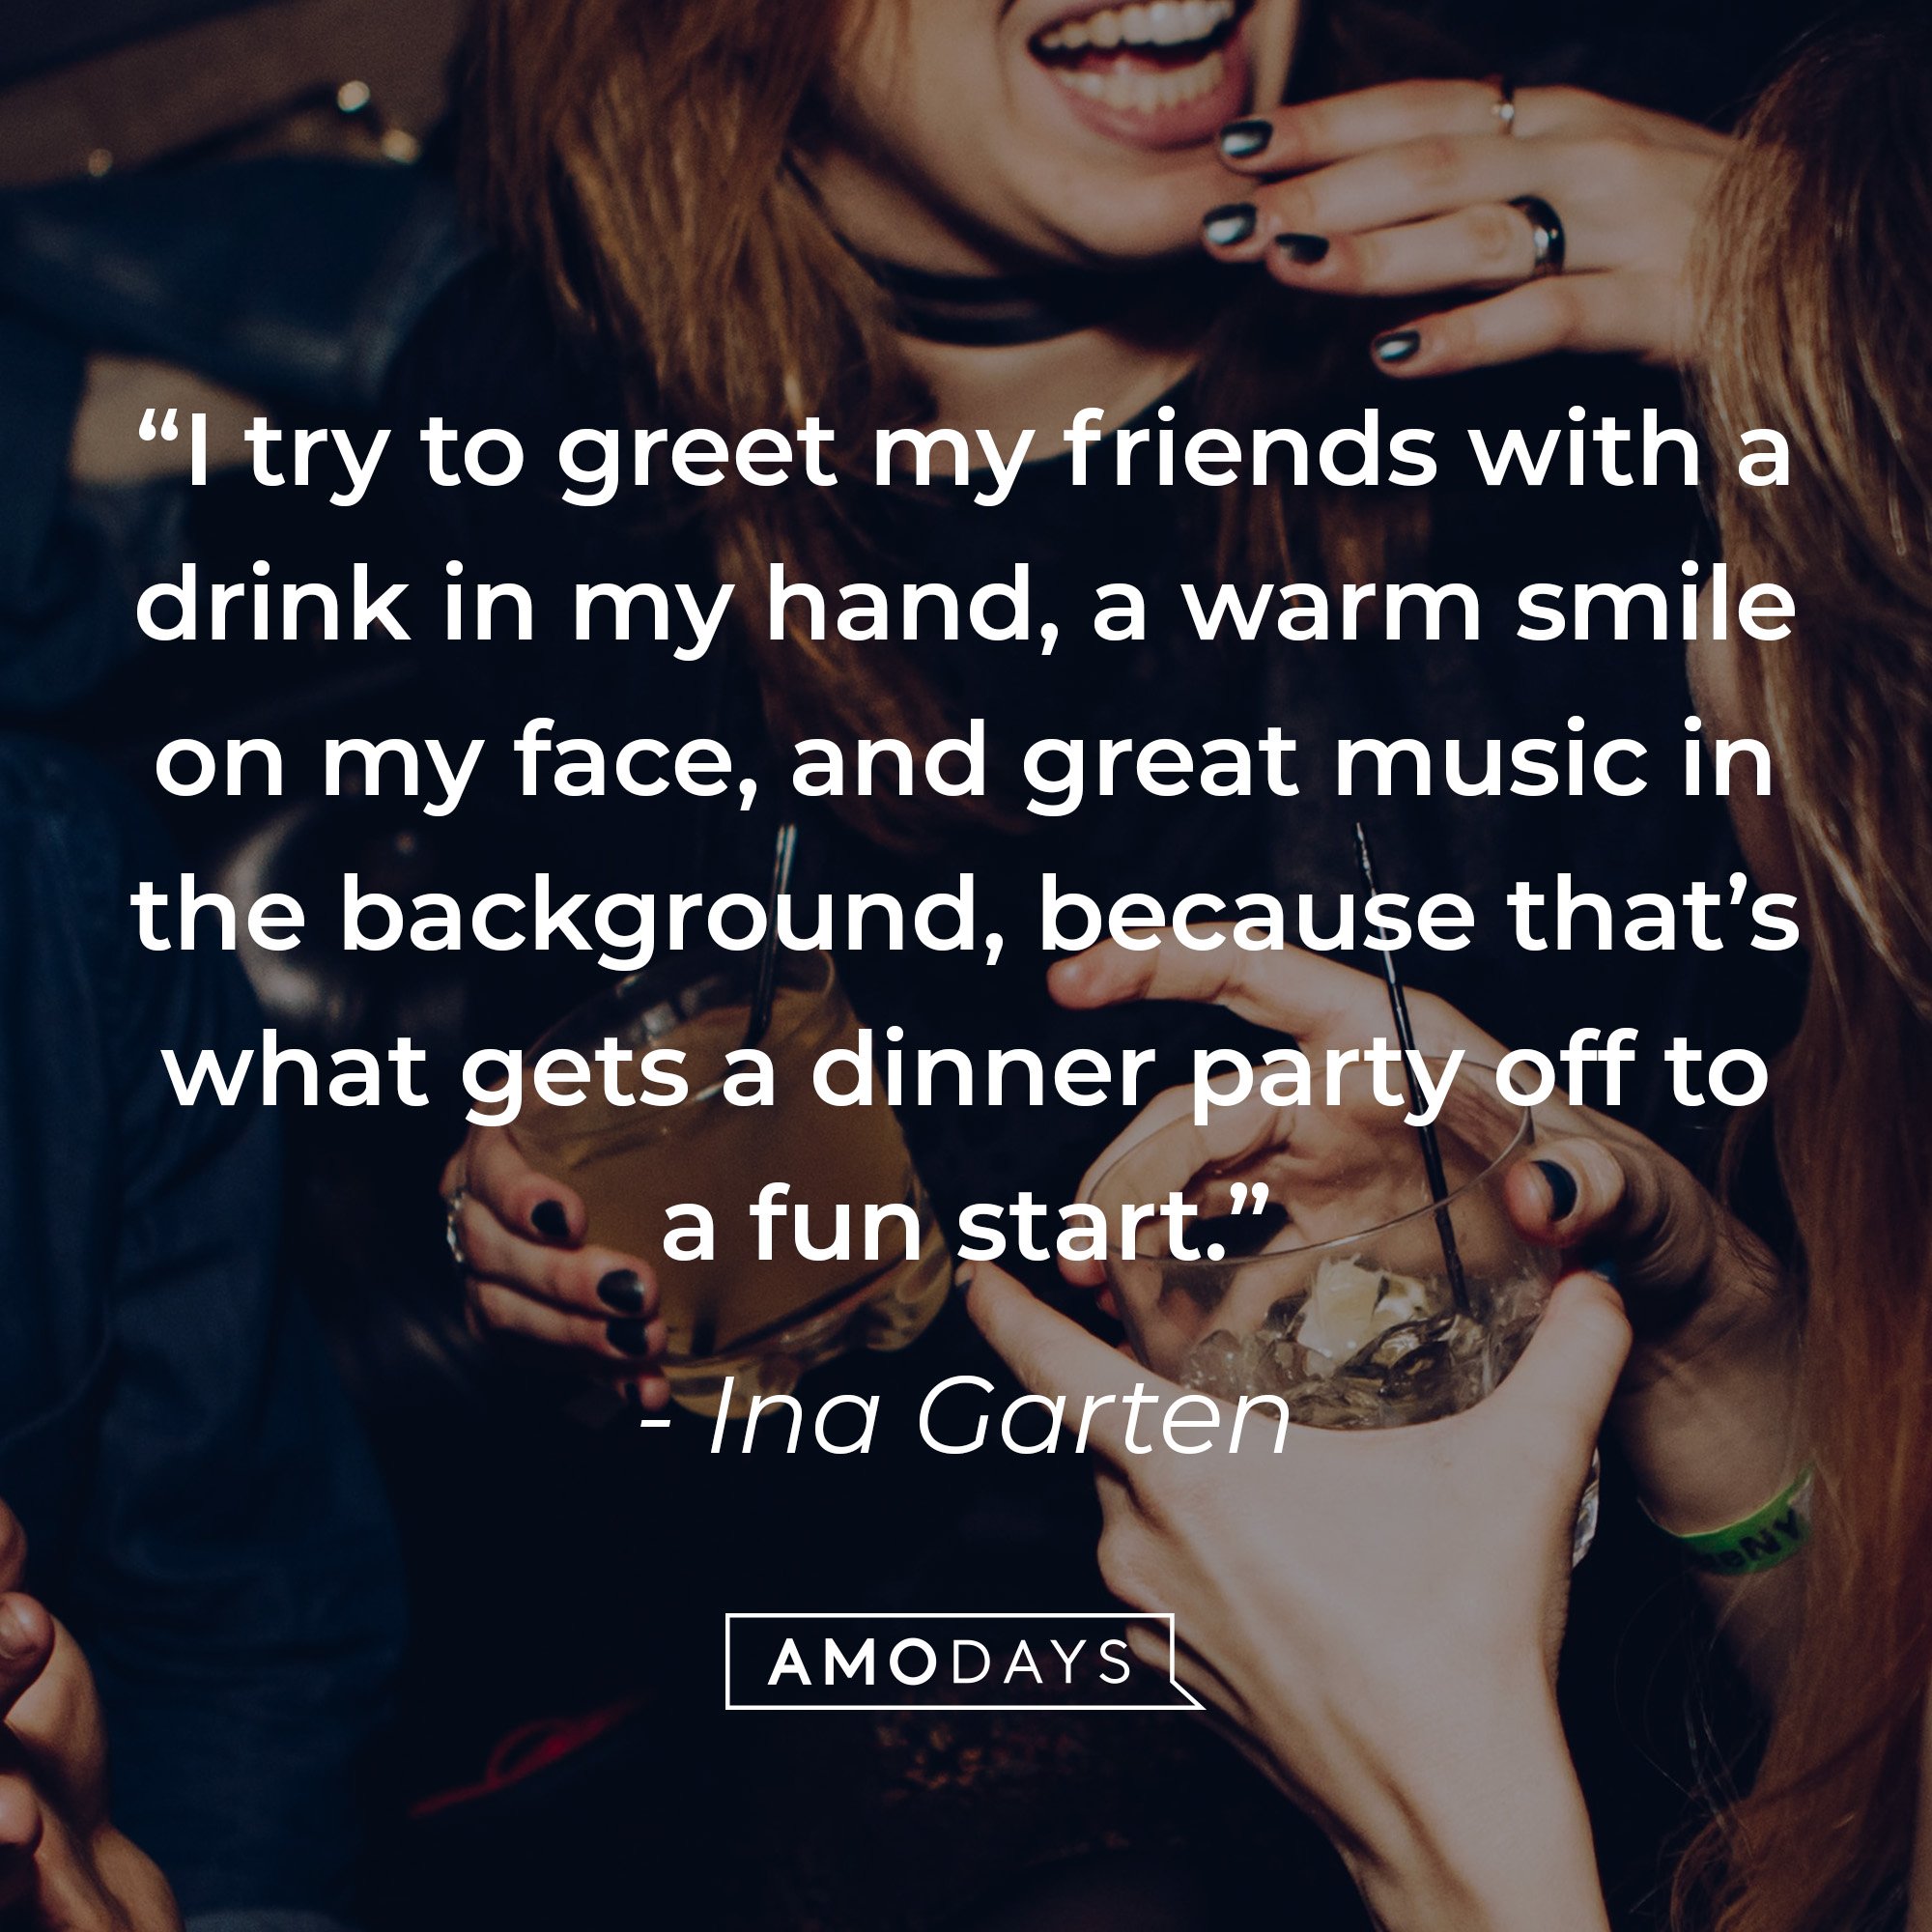 Ina Garten's quote: "I try to greet my friends with a drink in my hand, a warm smile on my face, and great music in the background, because that's what gets a dinner party off to a fun start." | Image: AmoDays 